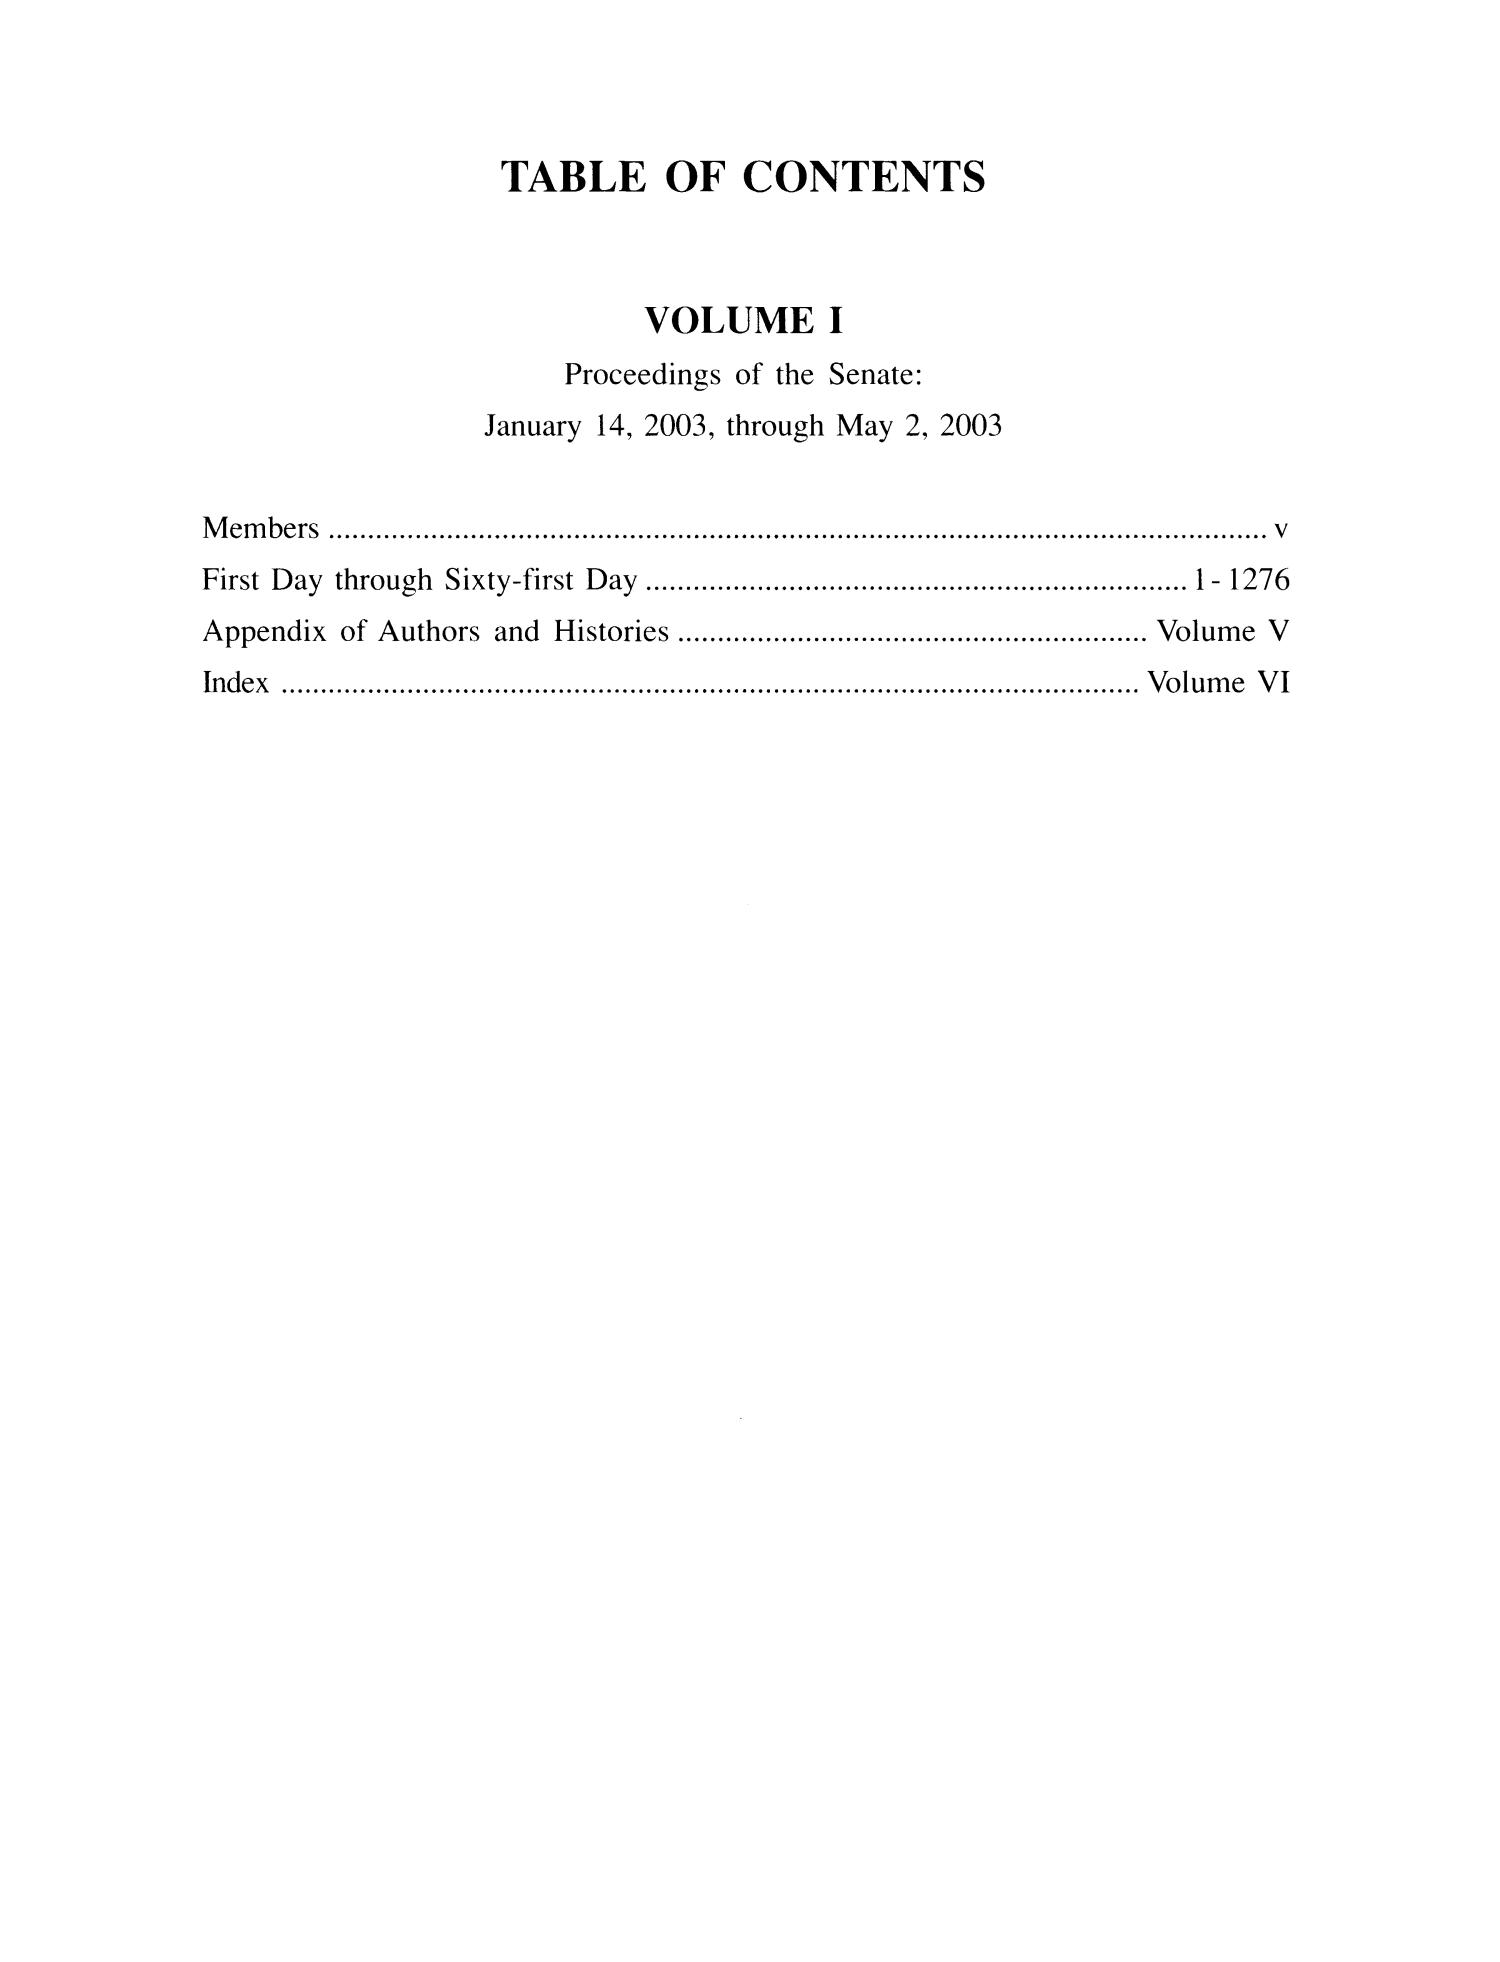 Journal of the Senate, Regular Session of the Seventy-Eighth Legislature of the State of Texas, Volume 1
                                                
                                                    None
                                                